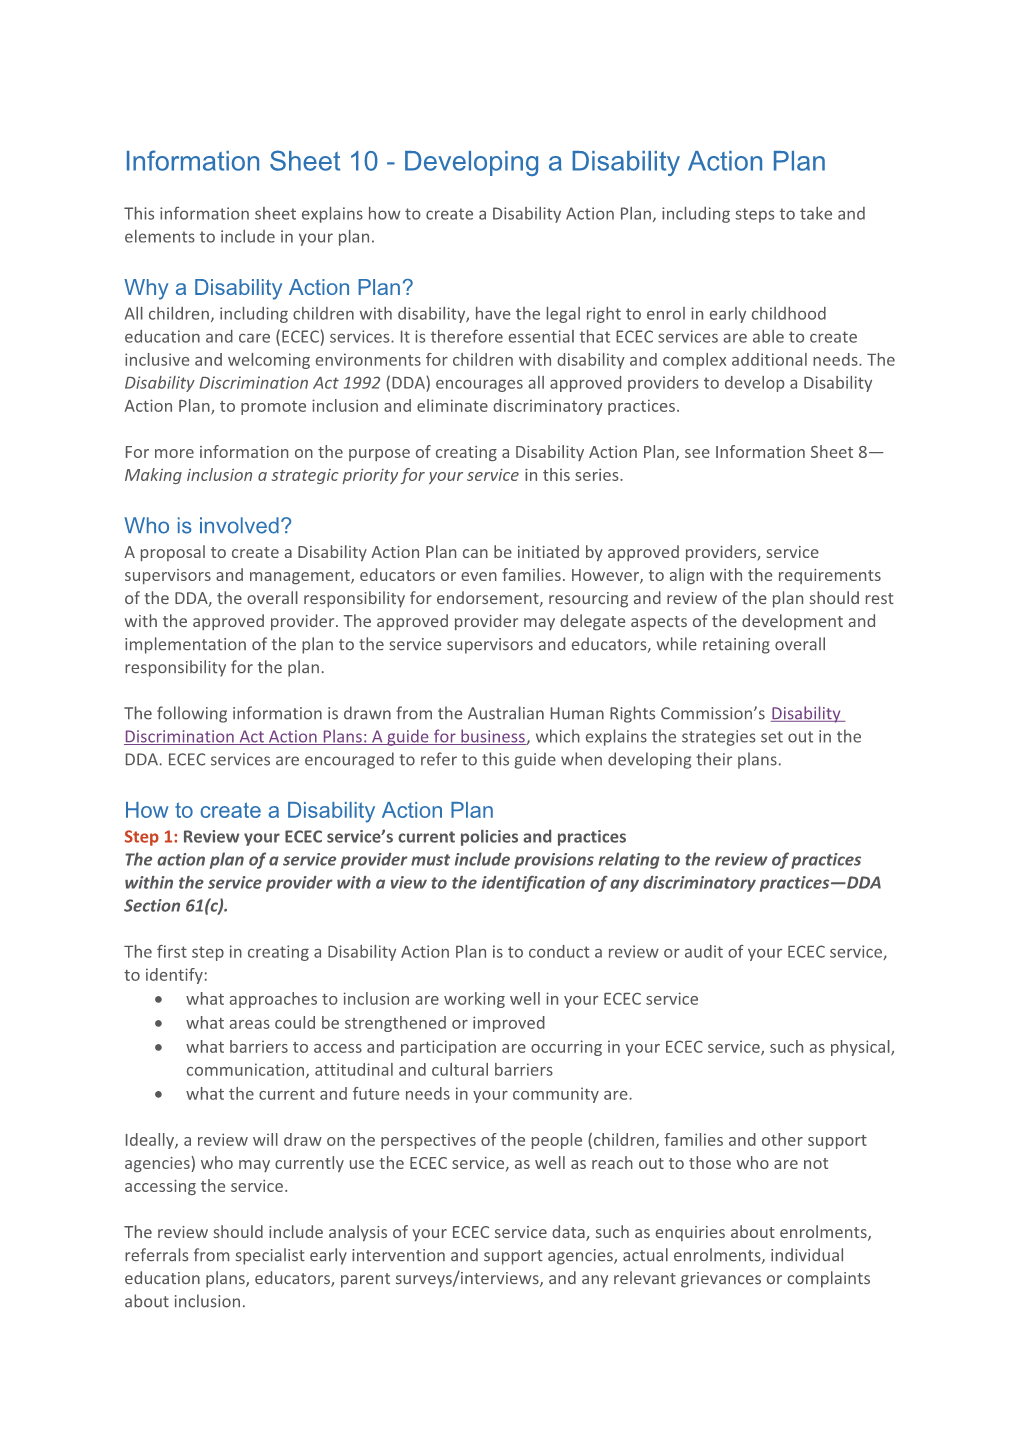 Information Sheet 10 - Developing a Disability Action Plan